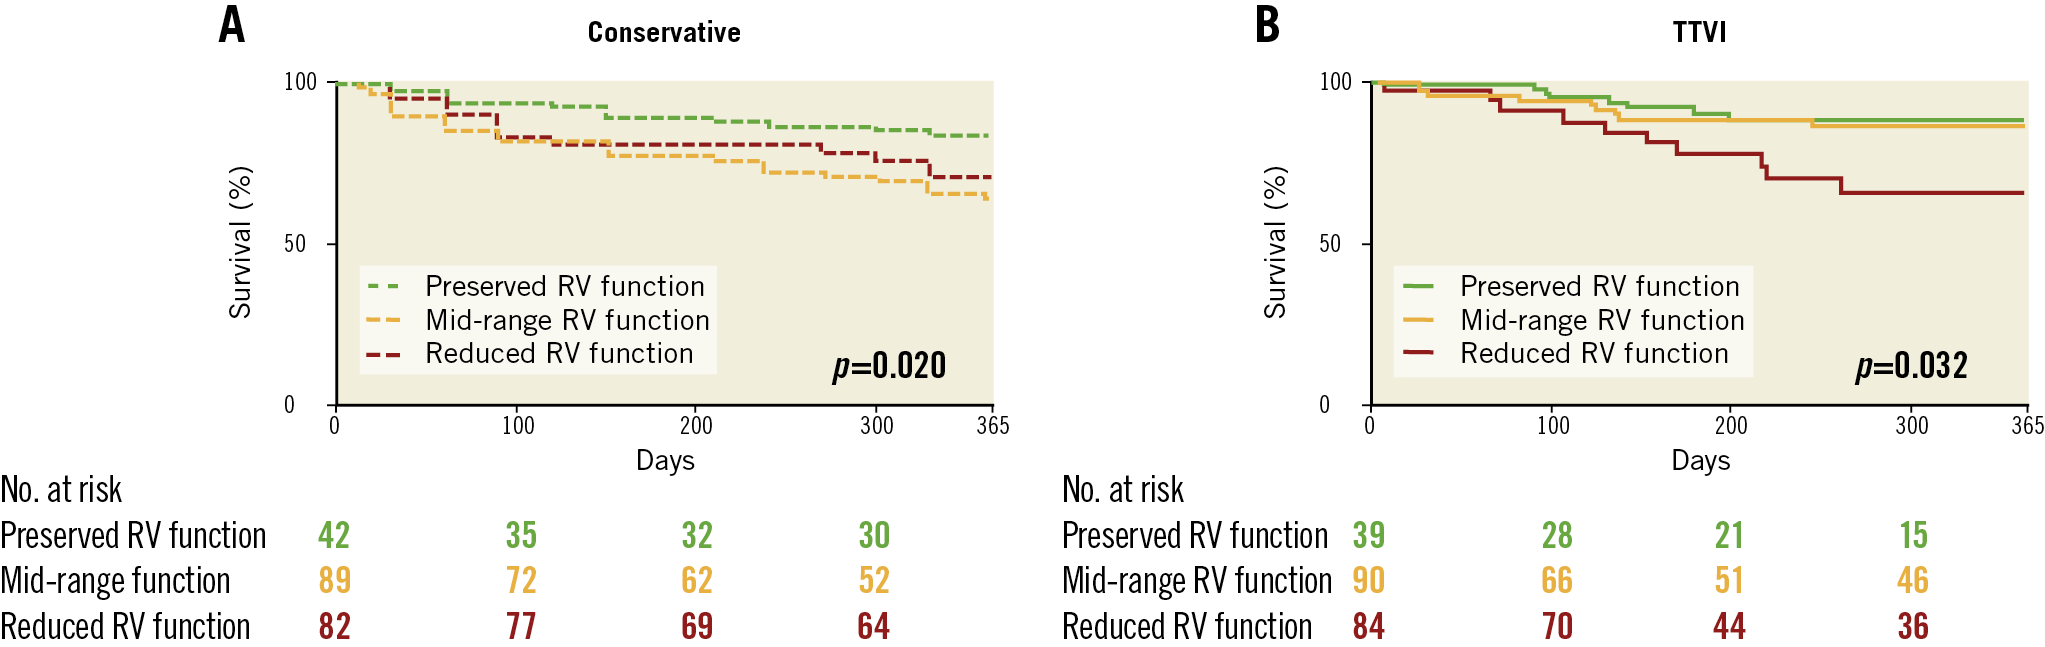 Figure 2. Increased mortality in reduced right ventricular (RV) function in conservatively treated tricuspid regurgitation (TR) and after transcatheter tricuspid valve intervention (TTVI). A) Survival in patients after conservative treatment in the propensity-matched cohort stratified by RV function. Kaplan-Meier analysis; N=213; p for log-rank test. B) Kaplan-Meier analysis for survival in patients after TTVI at one year stratified for RV function. N=213; p for log-rank test.